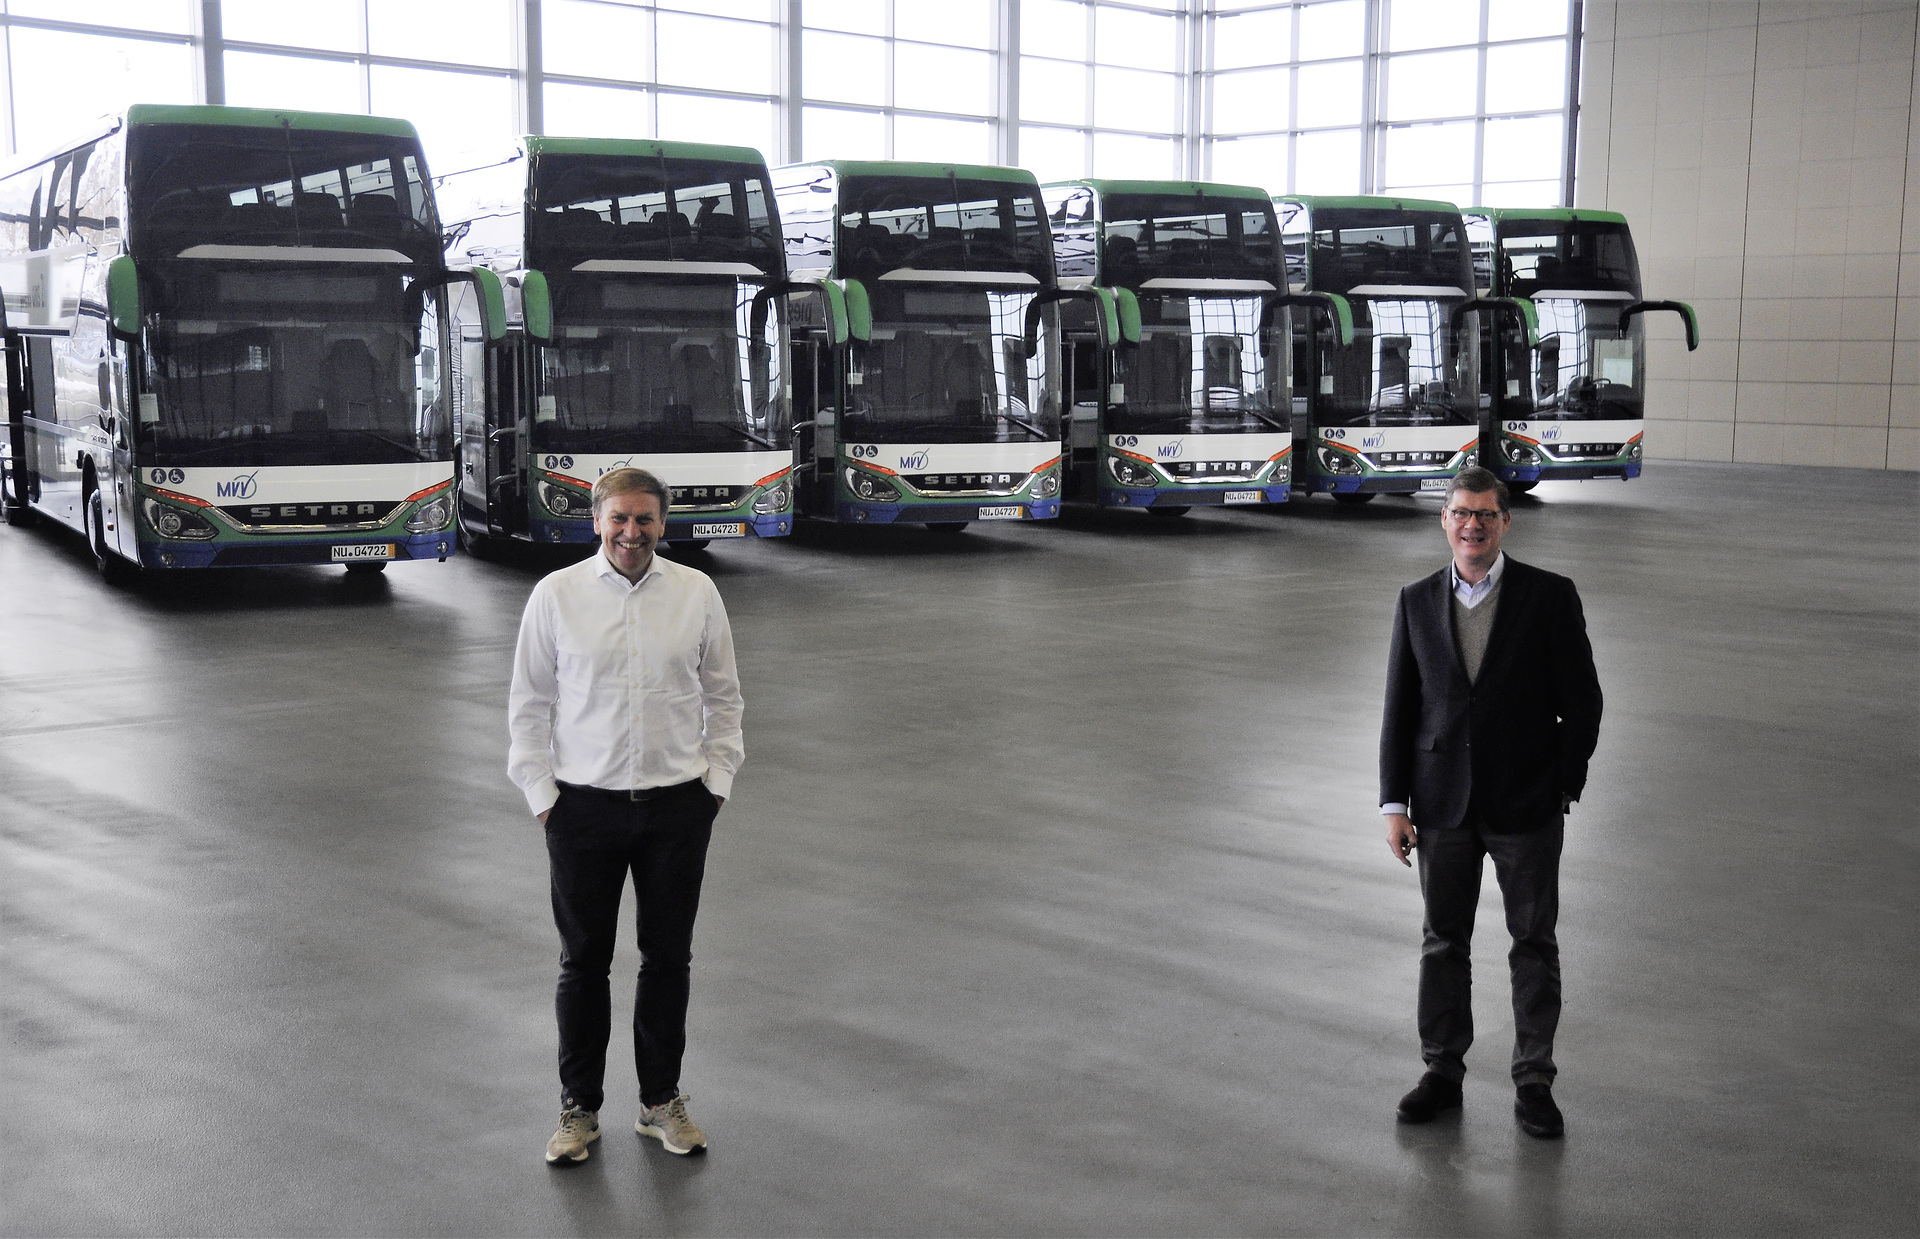 19 new Setra buses for Geldhauser